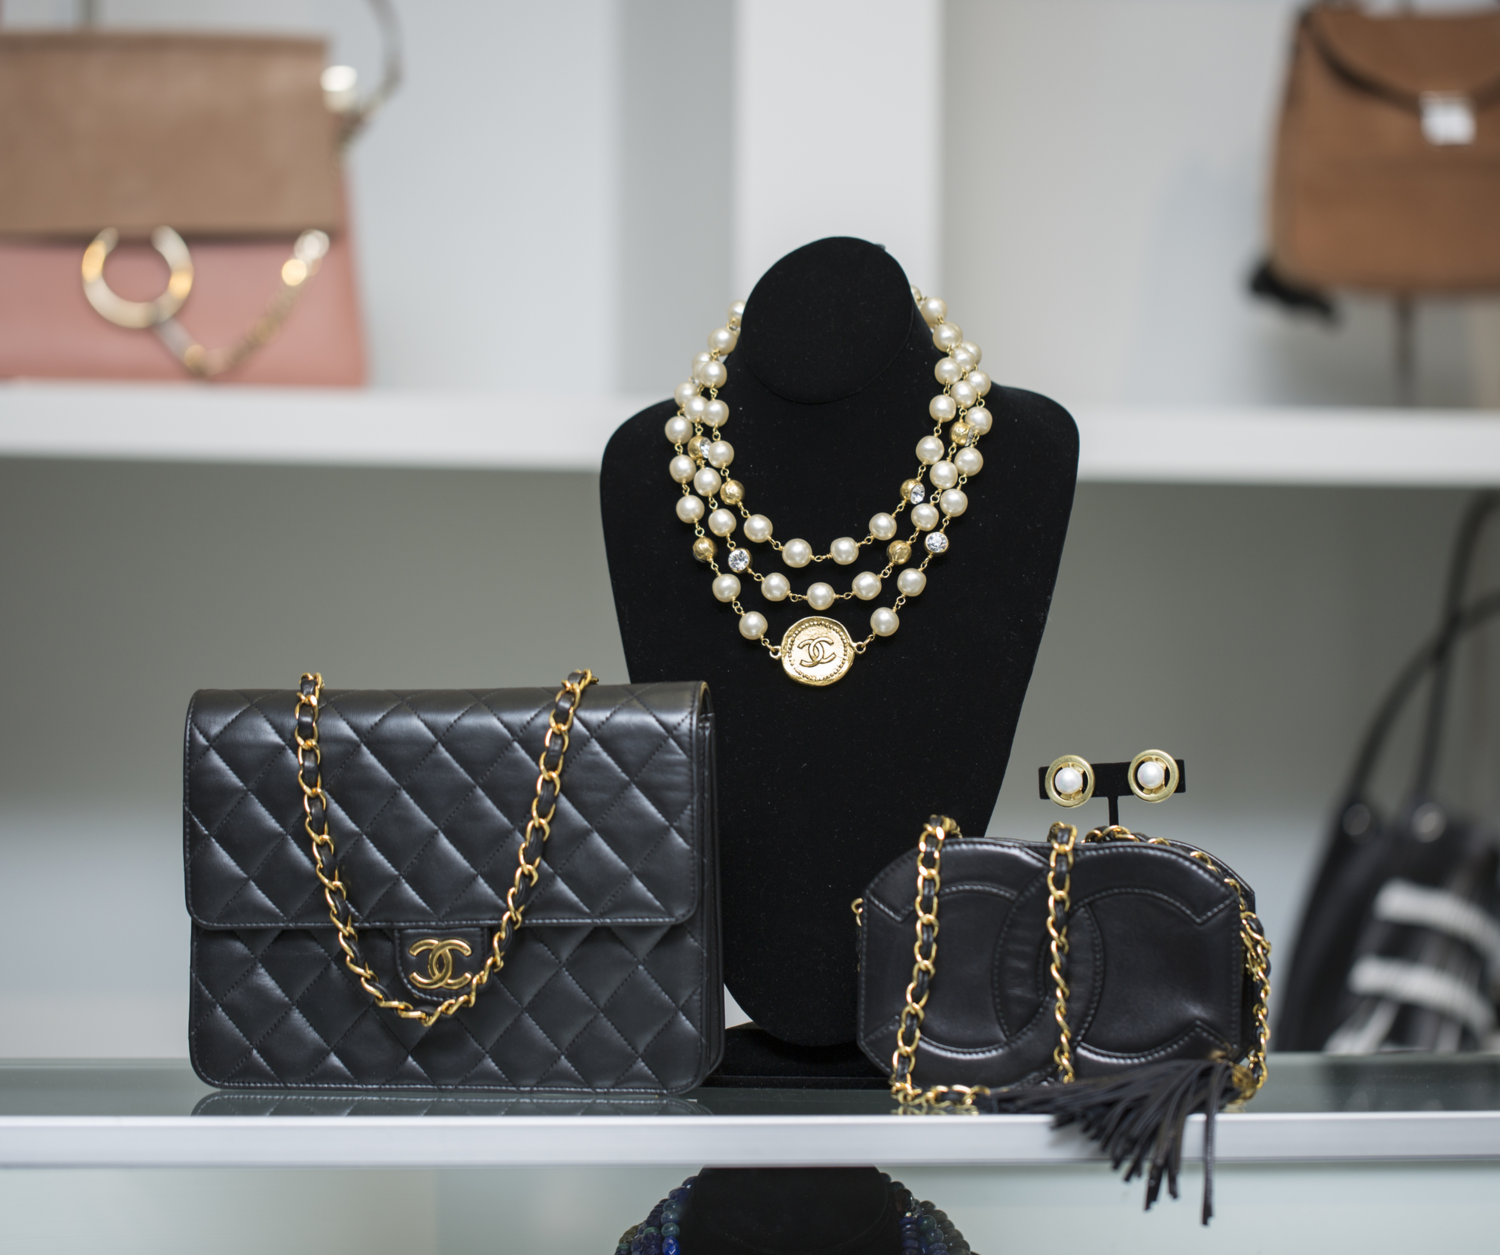 Handbags and Accessories